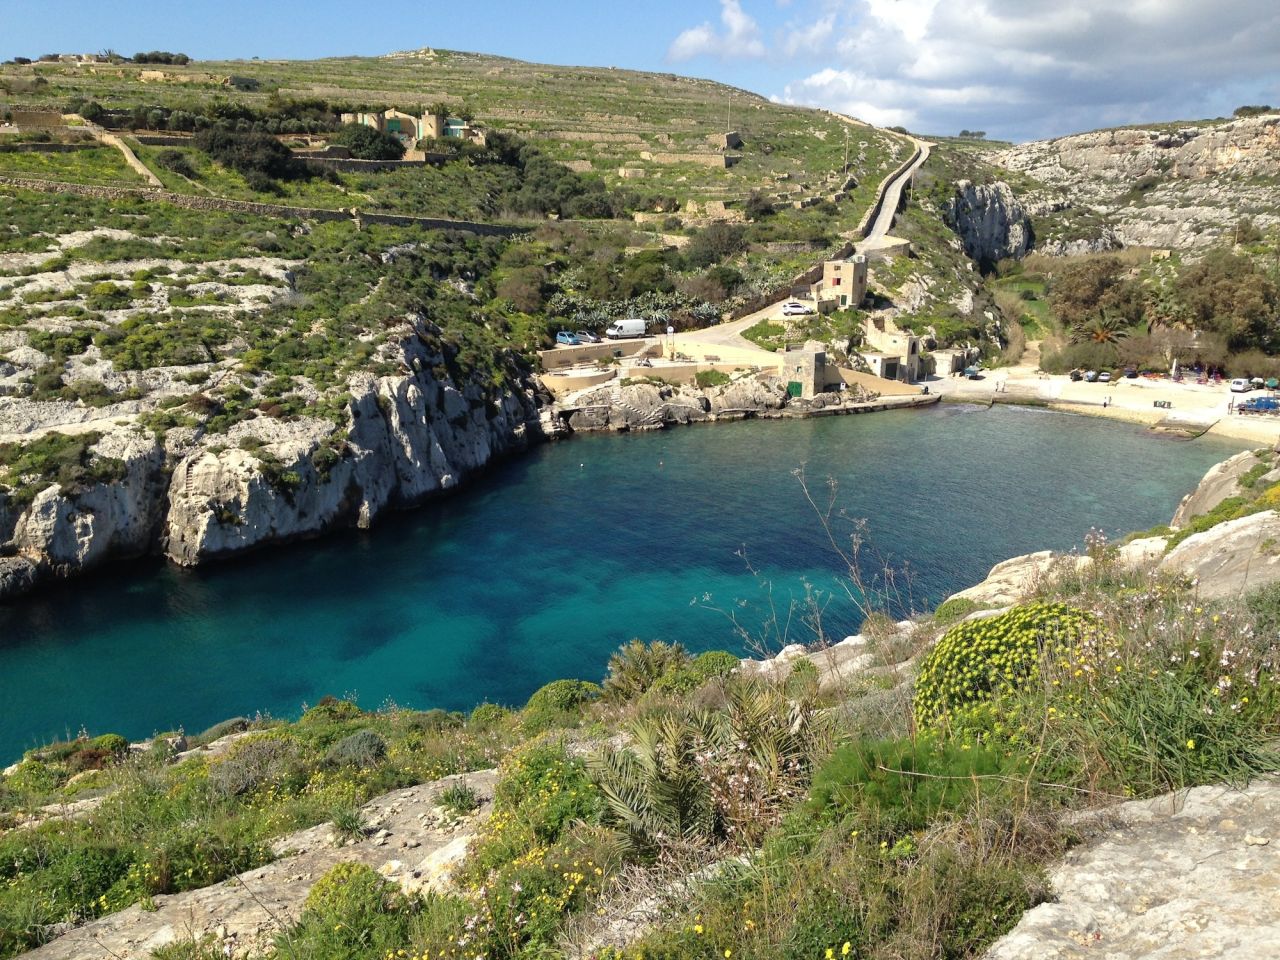 With Angelina Jolie's upcoming film "By the Sea" set on the the Maltese island of Gozo, visitor numbers are expected to rise after the film comes out later this year. Gozo is just a 20-minute ferry ride from Malta. 